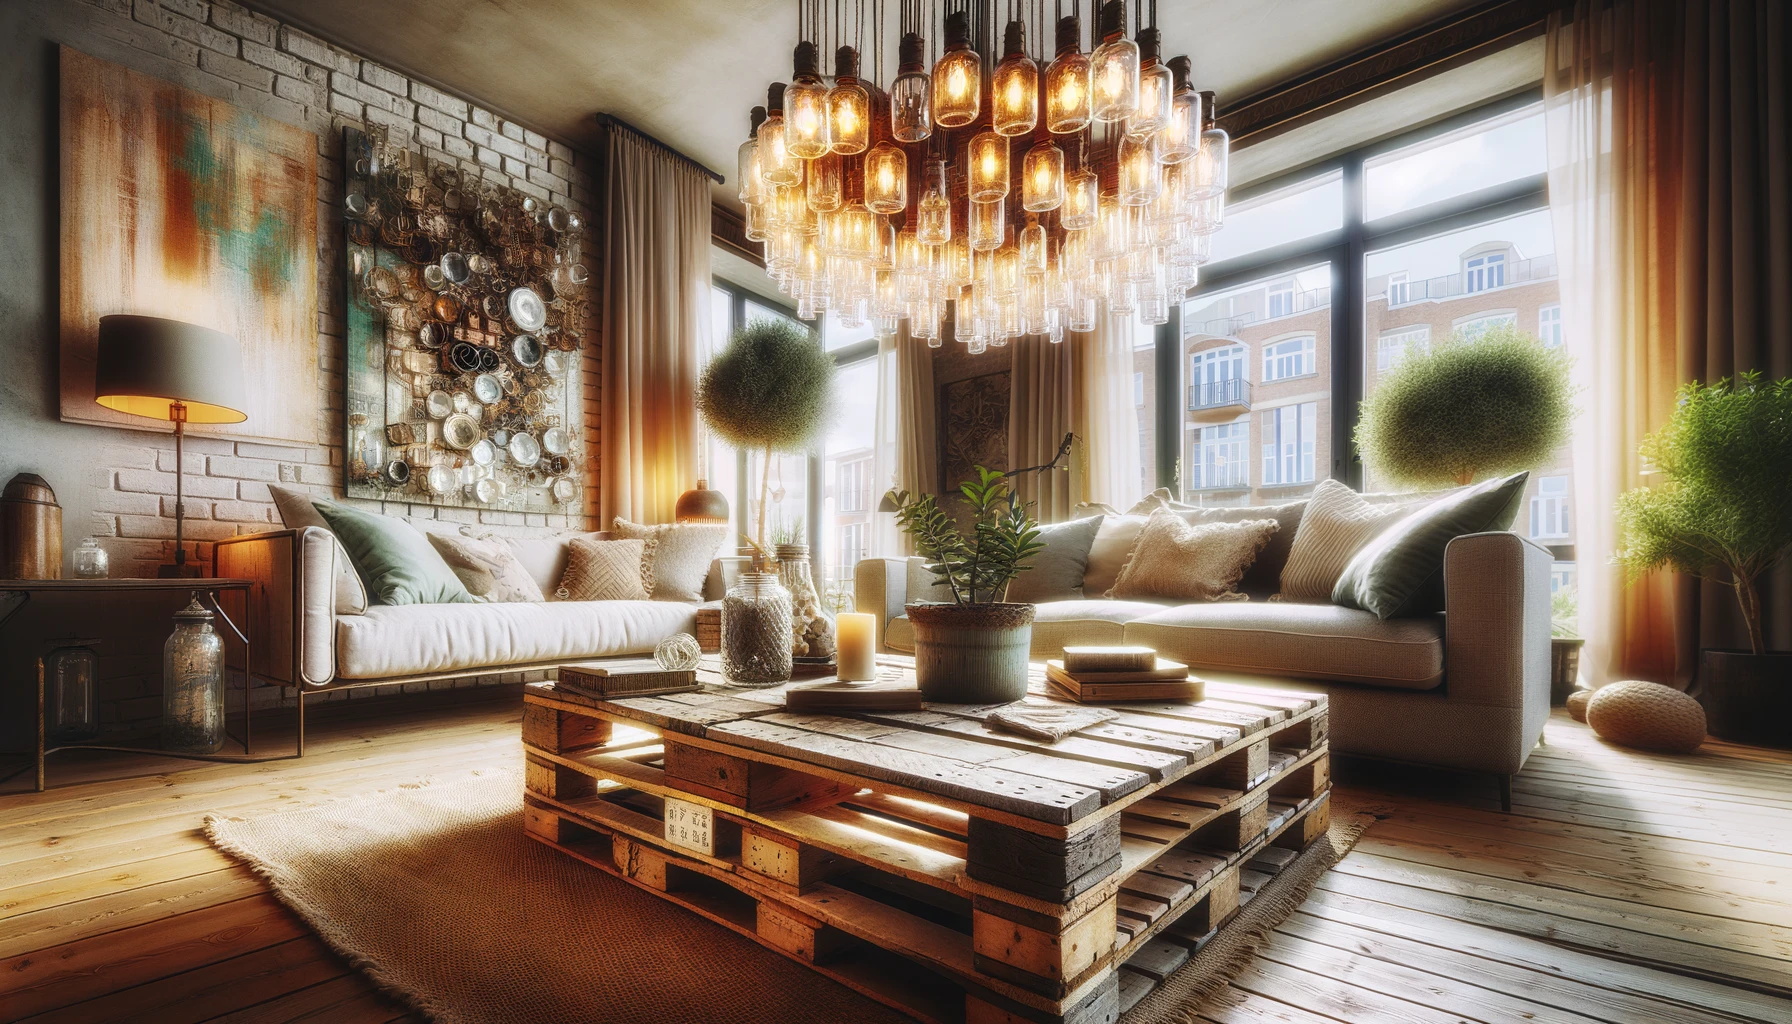 Chic cozy living room with vintage decor and large windows.